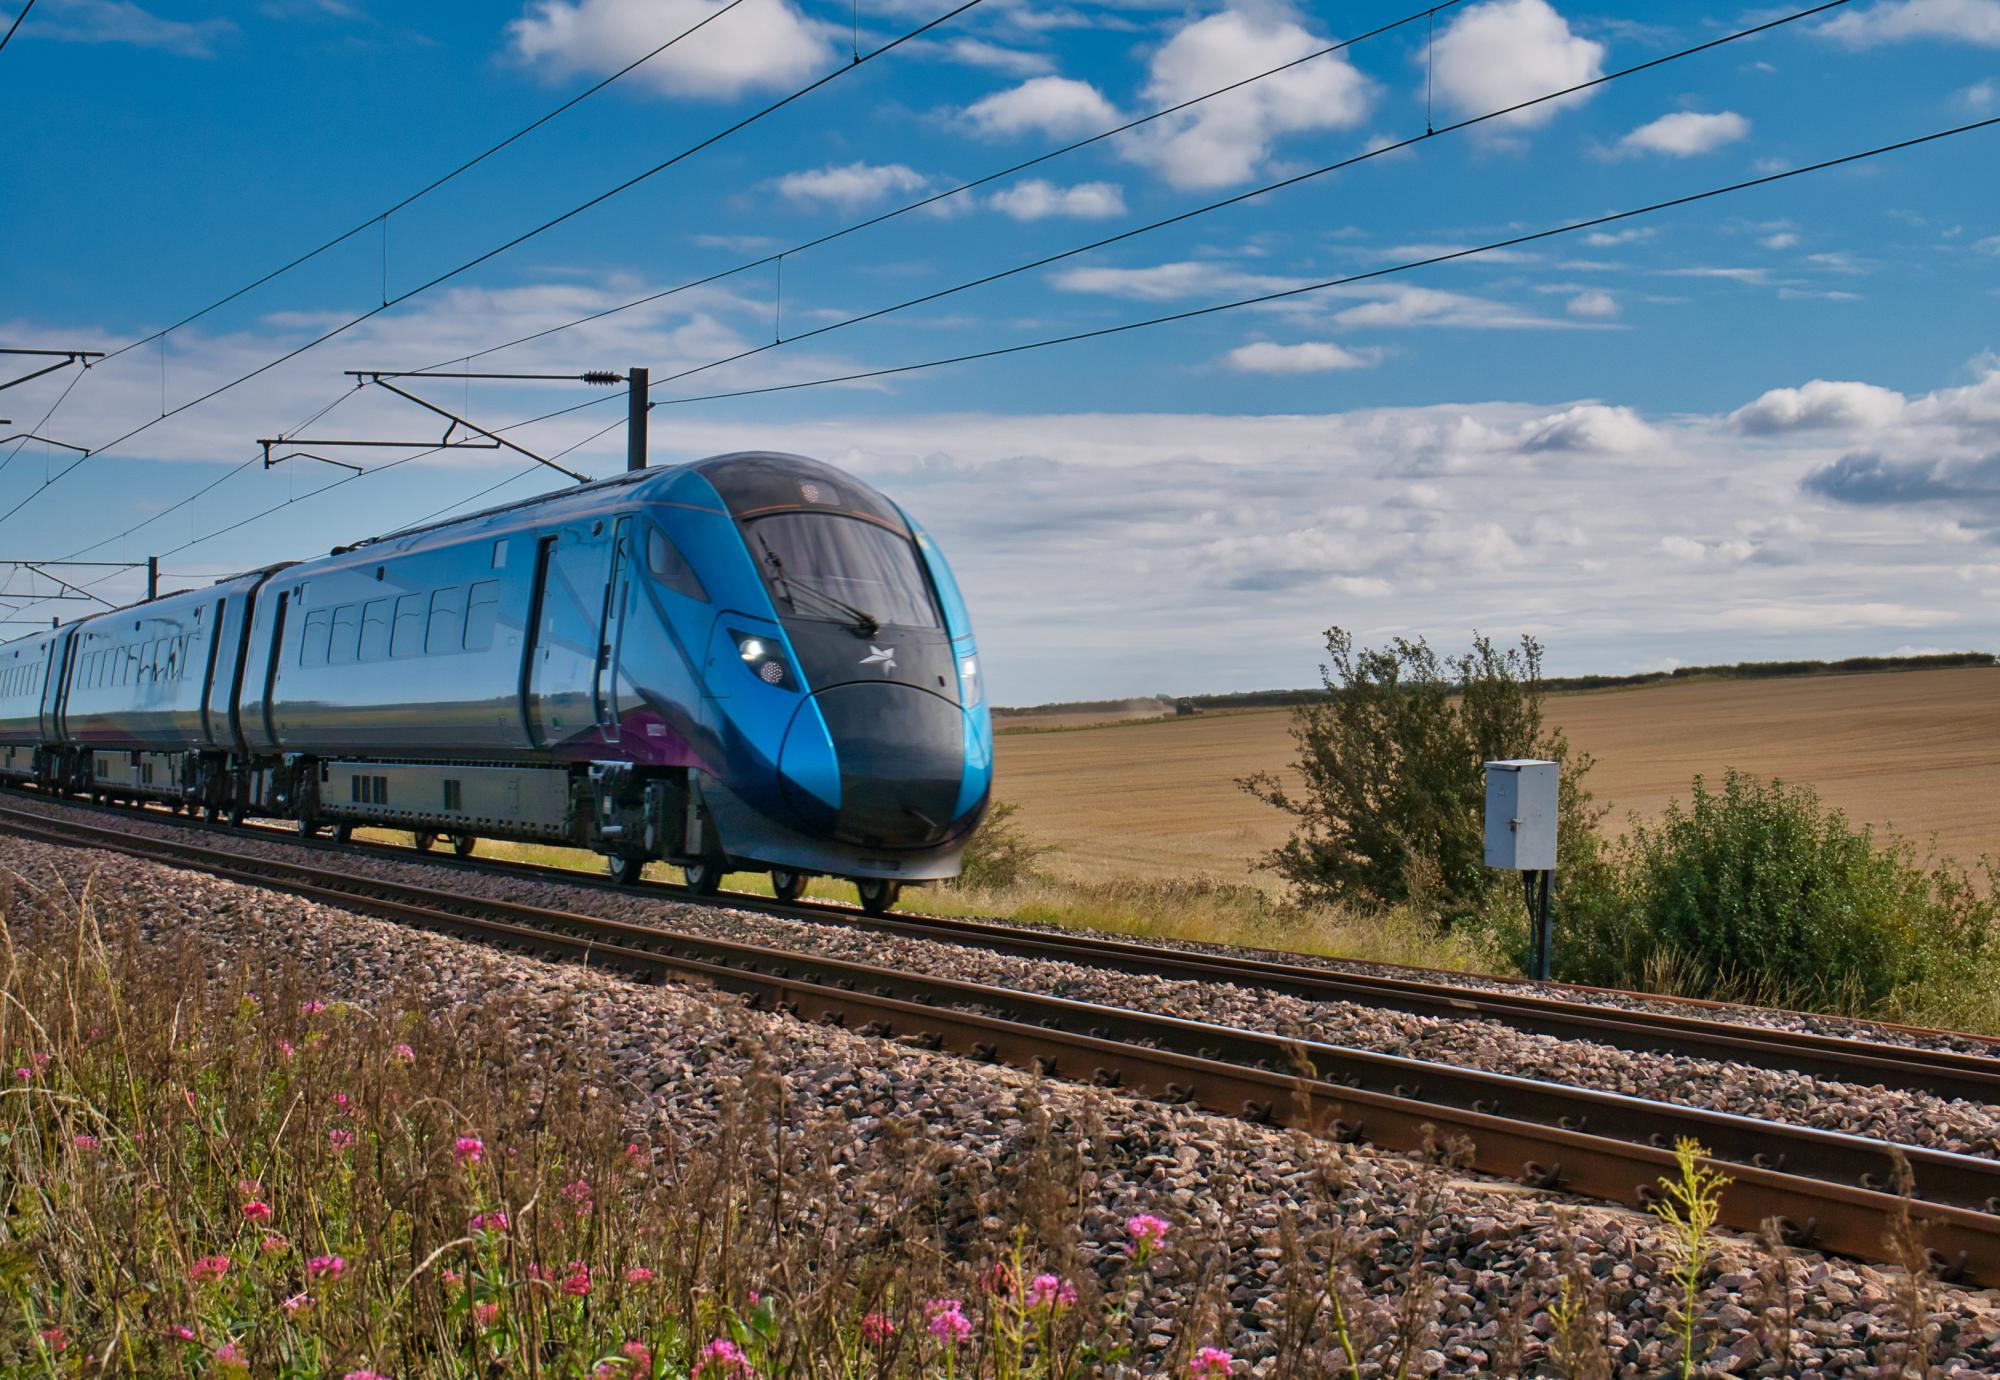 Transpennine Express train travelling at speed in Northumberland, UK - taken on a sunny day with white clouds.